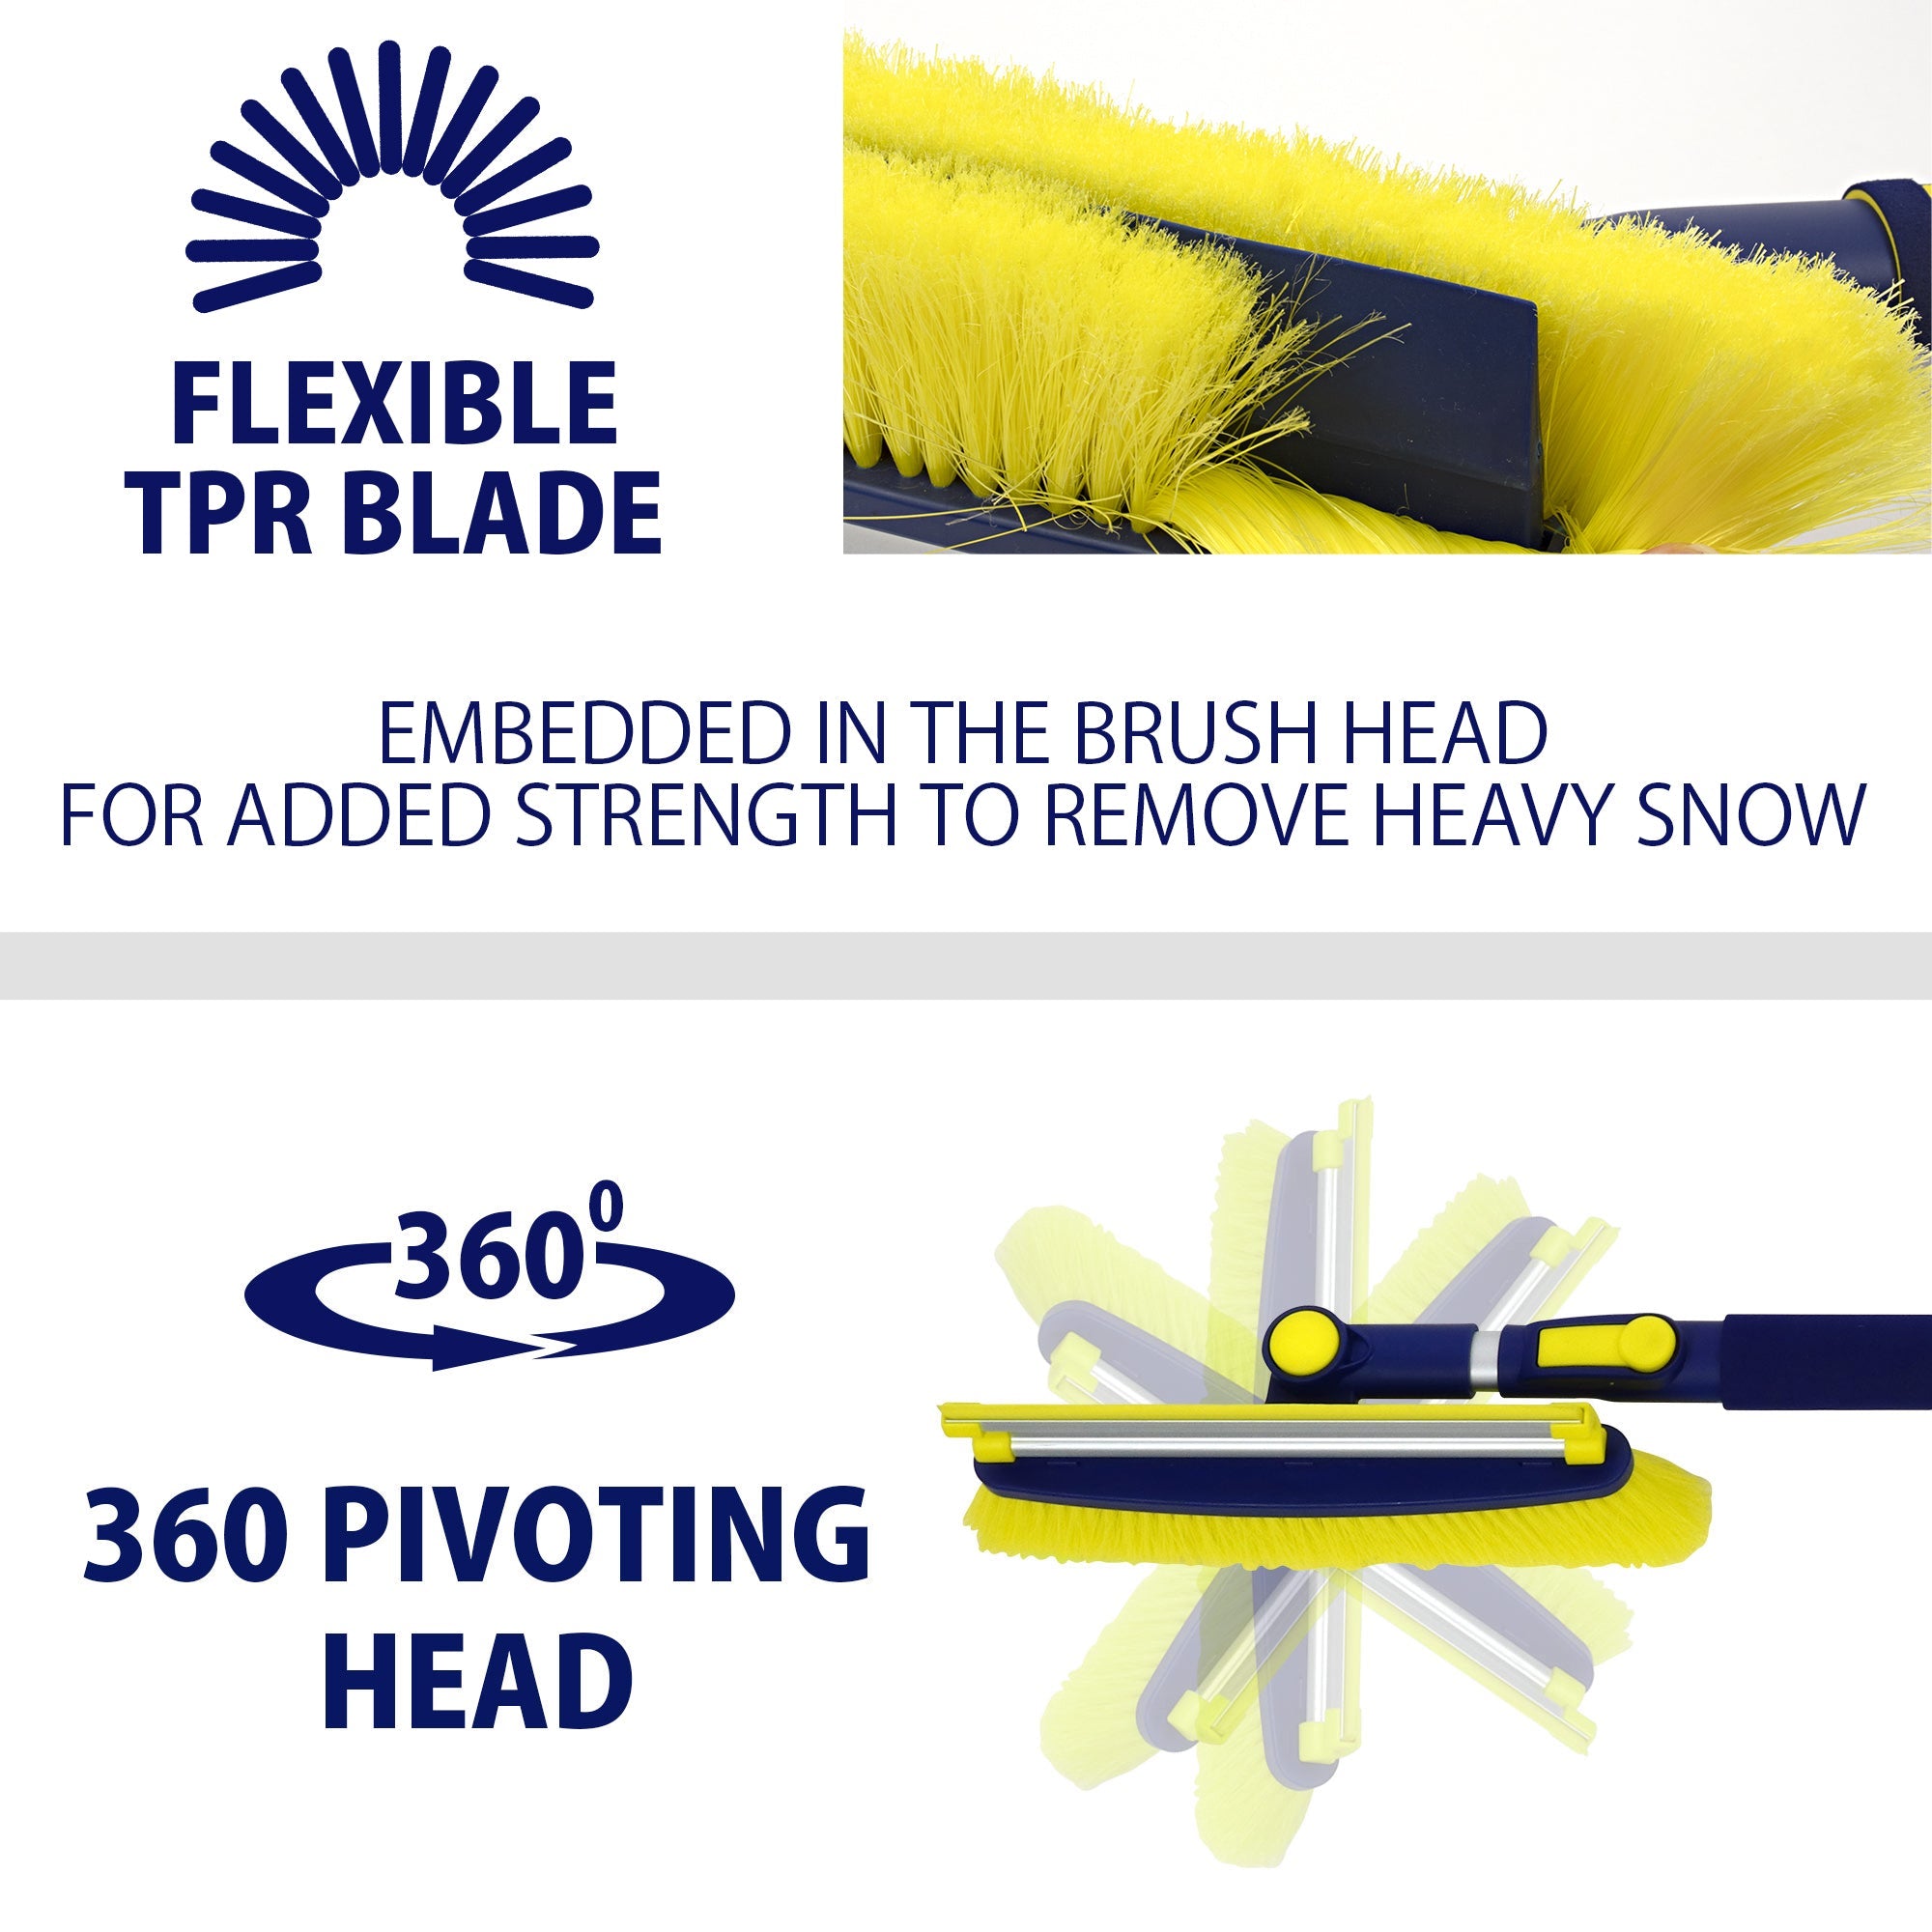 Top half shows a closeup product shot of the brush head with bristles bent away to show the support blade on a white background with text and icon to the left and below reading, "Flexible TPR blade embedded in the brush head for added strength to remove heavy snow. Bottom half shows an enhanced image of the brush head in 7 pre-set positions with text and icon to the left reading, "360 pivoting head"